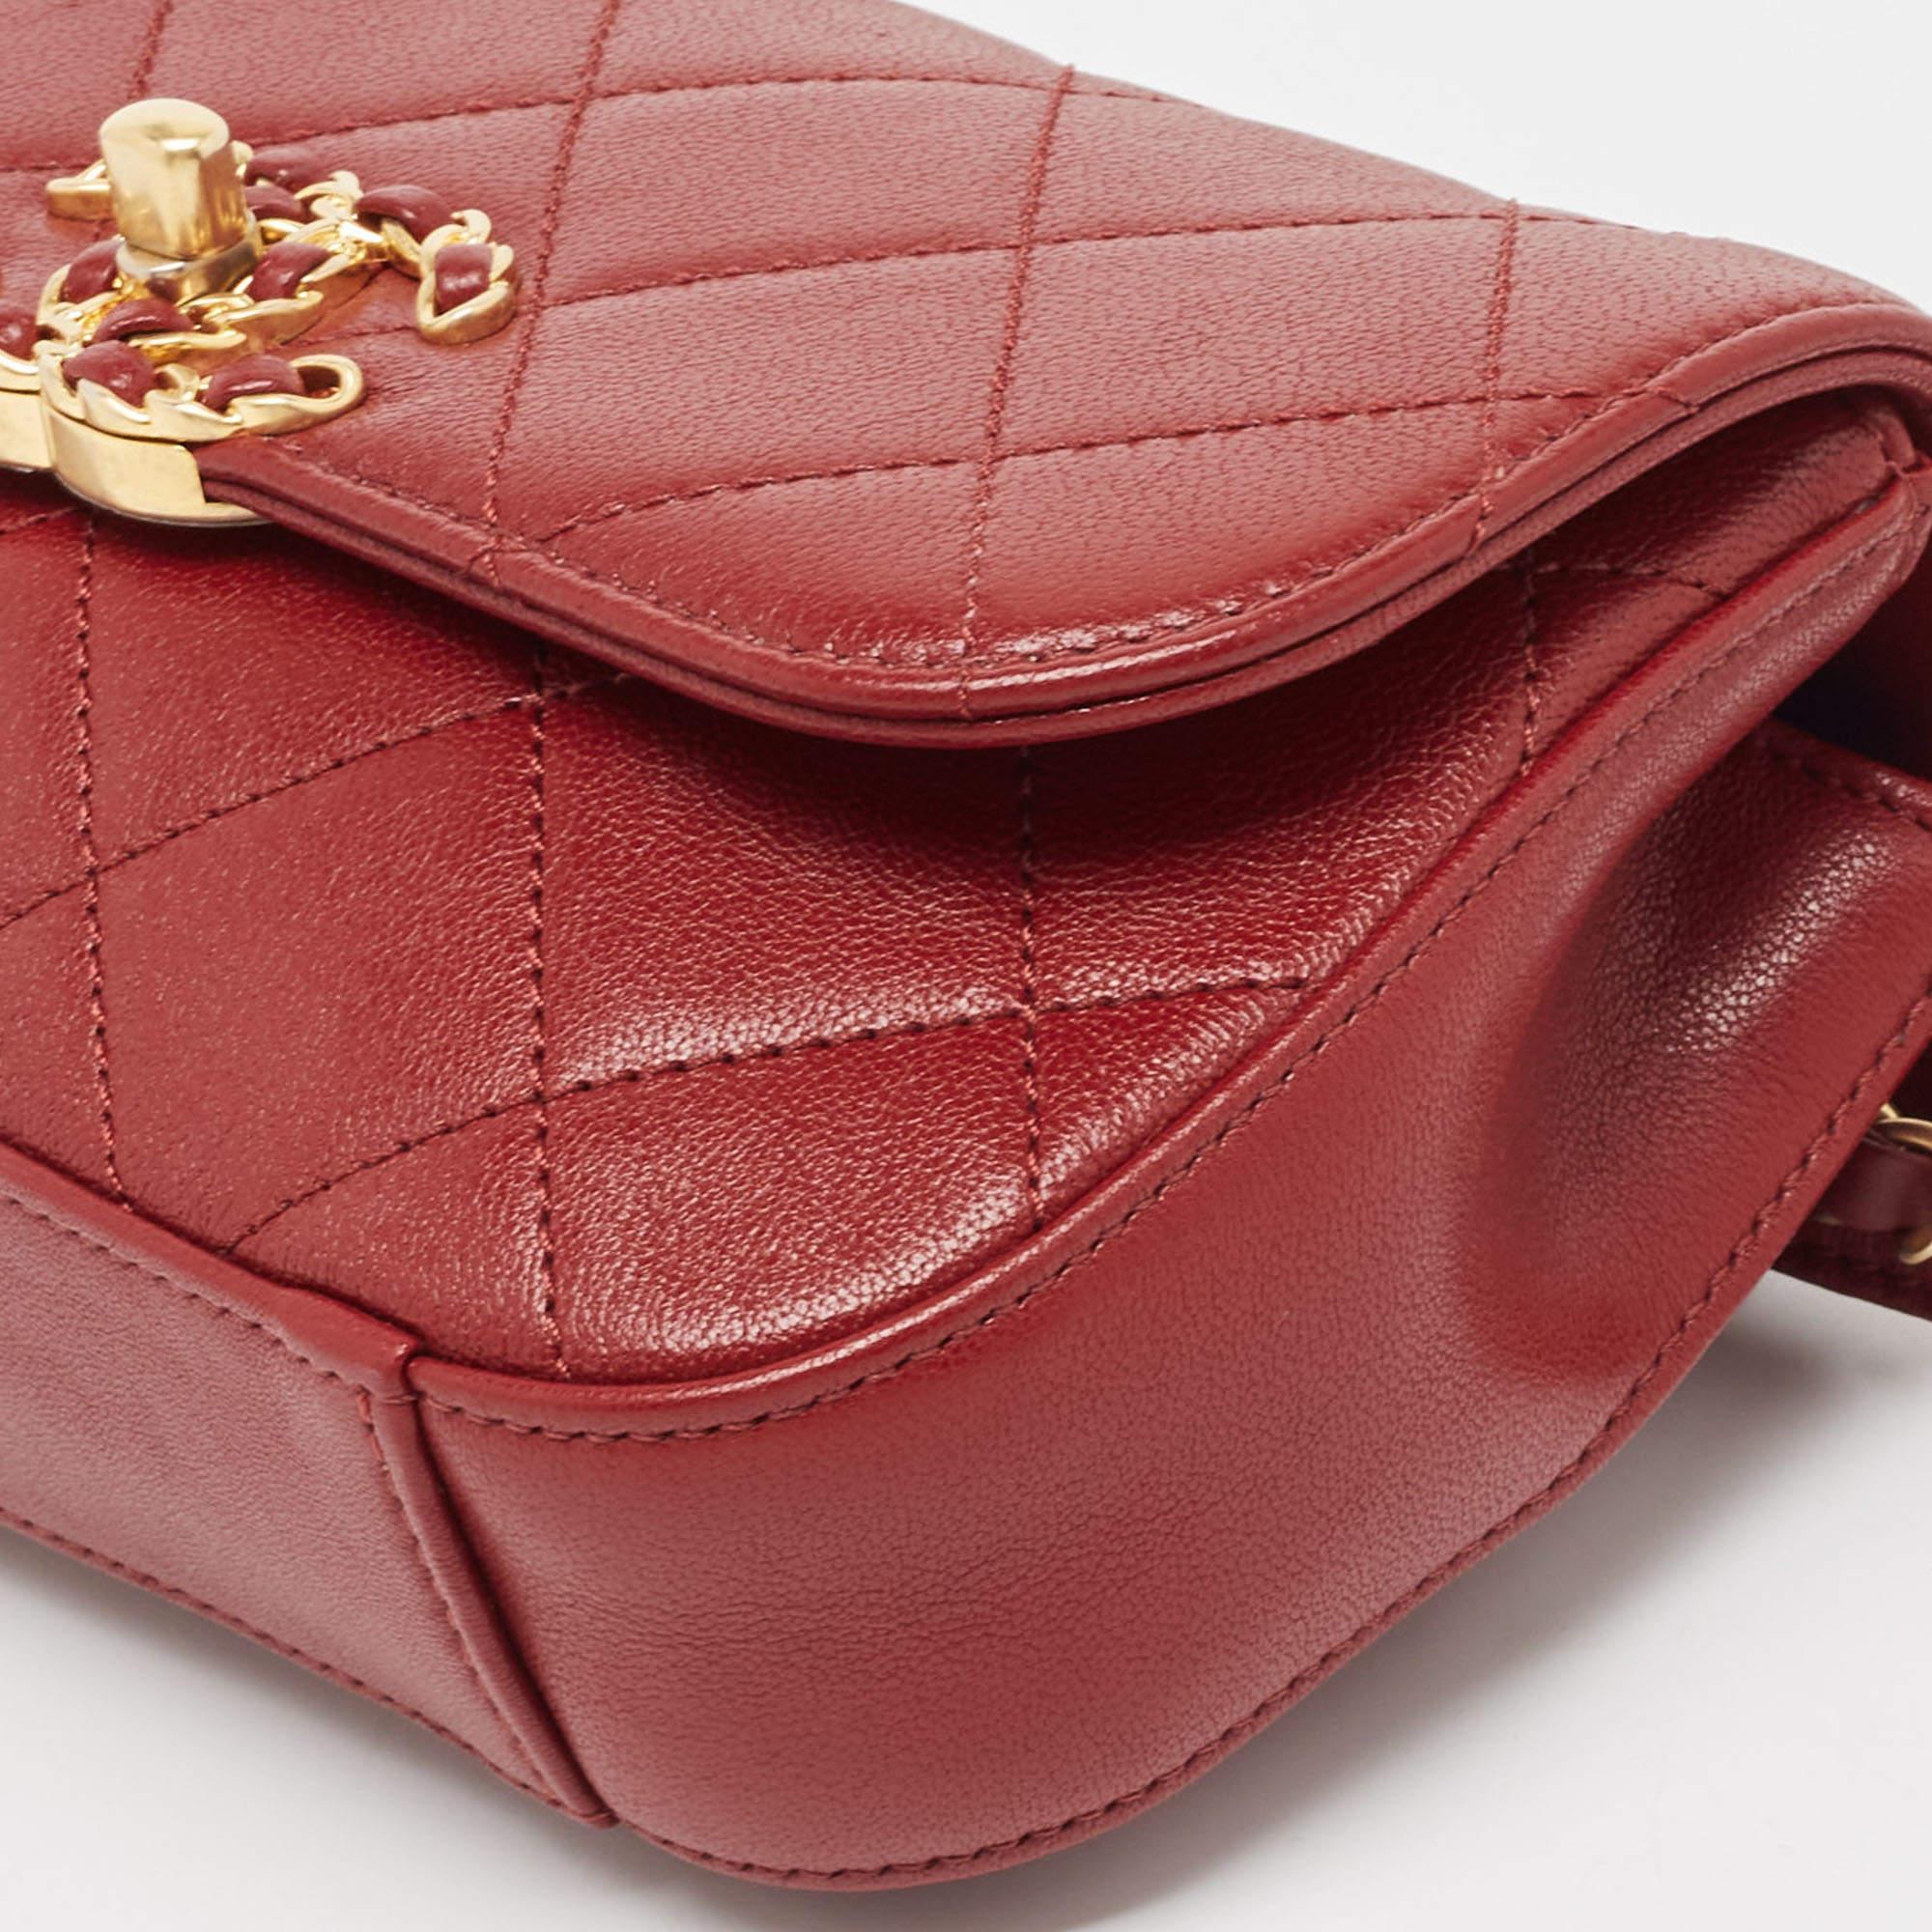 Chanel Dark Red Quilted Leather CC Flap Belt Bag For Sale 3